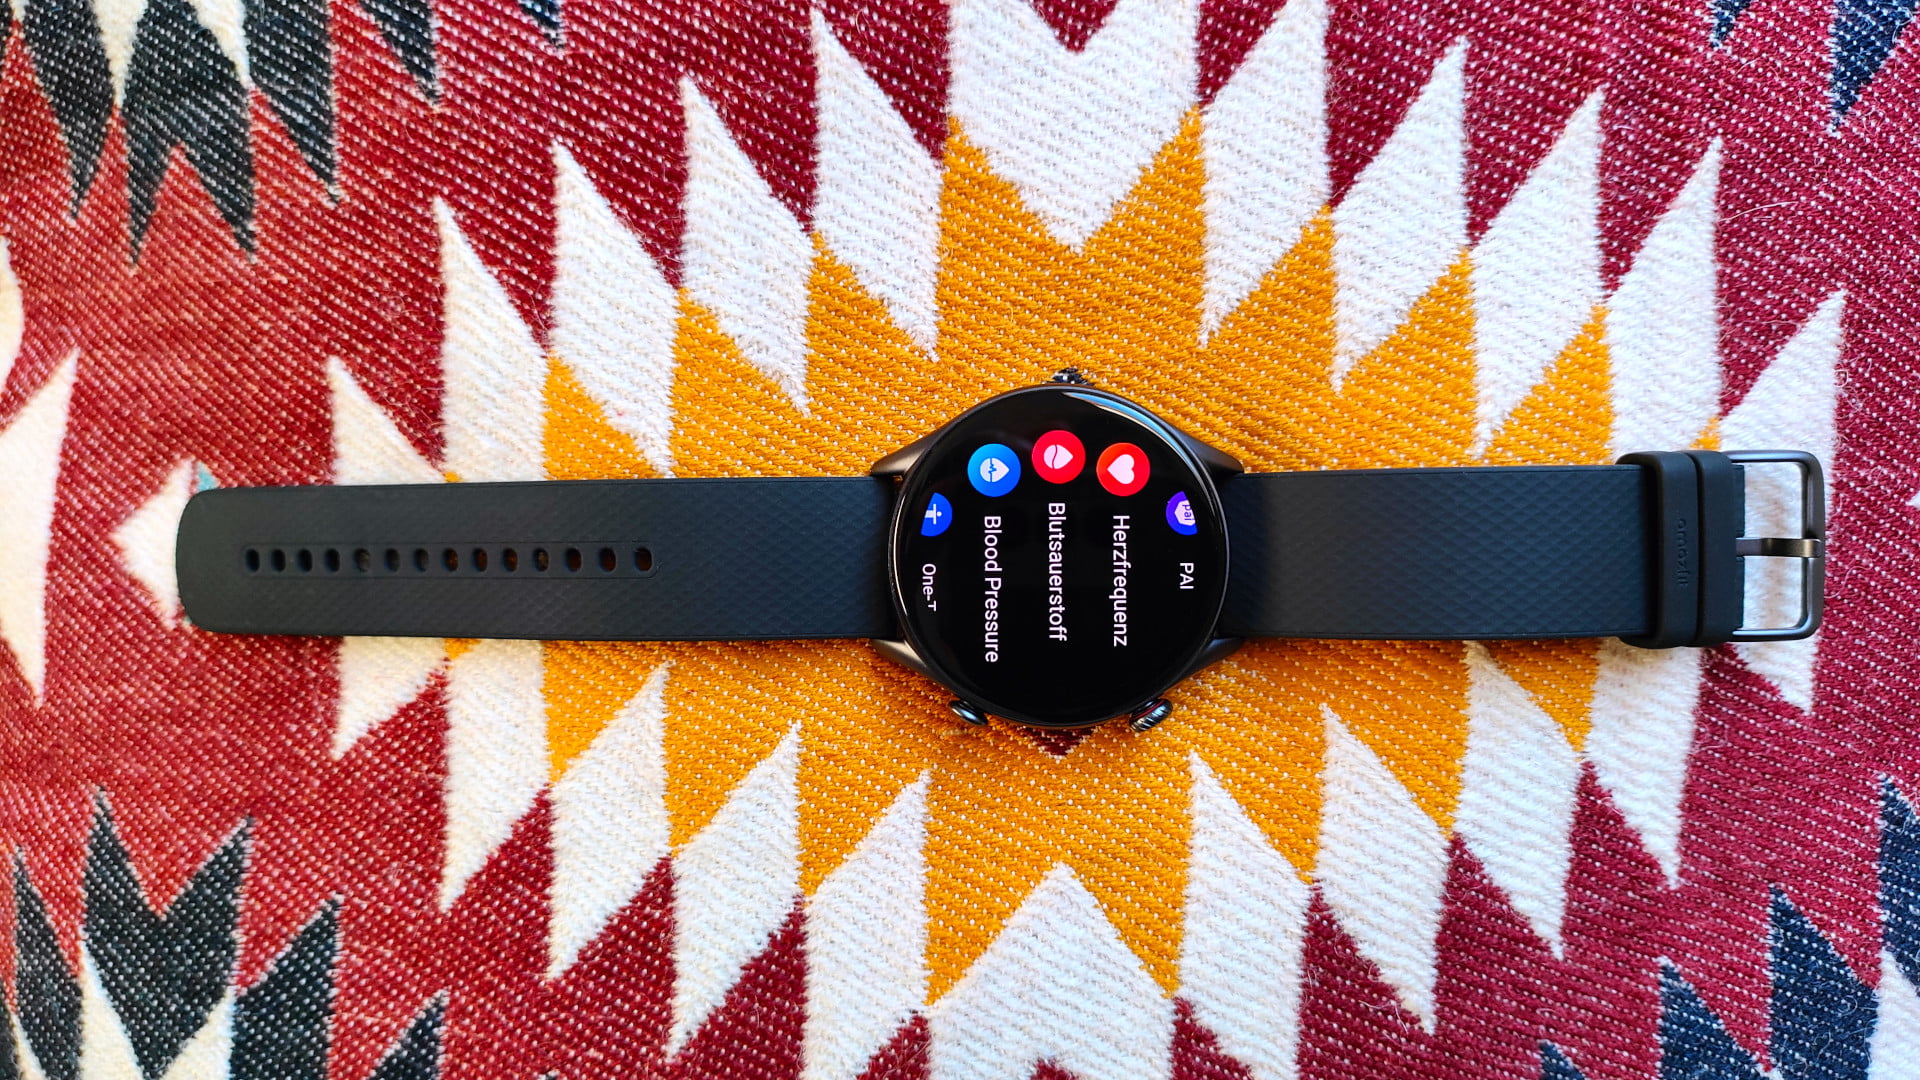 Amazfit GTR 3 Pro review - the most powerful Amazfit smartwatch to